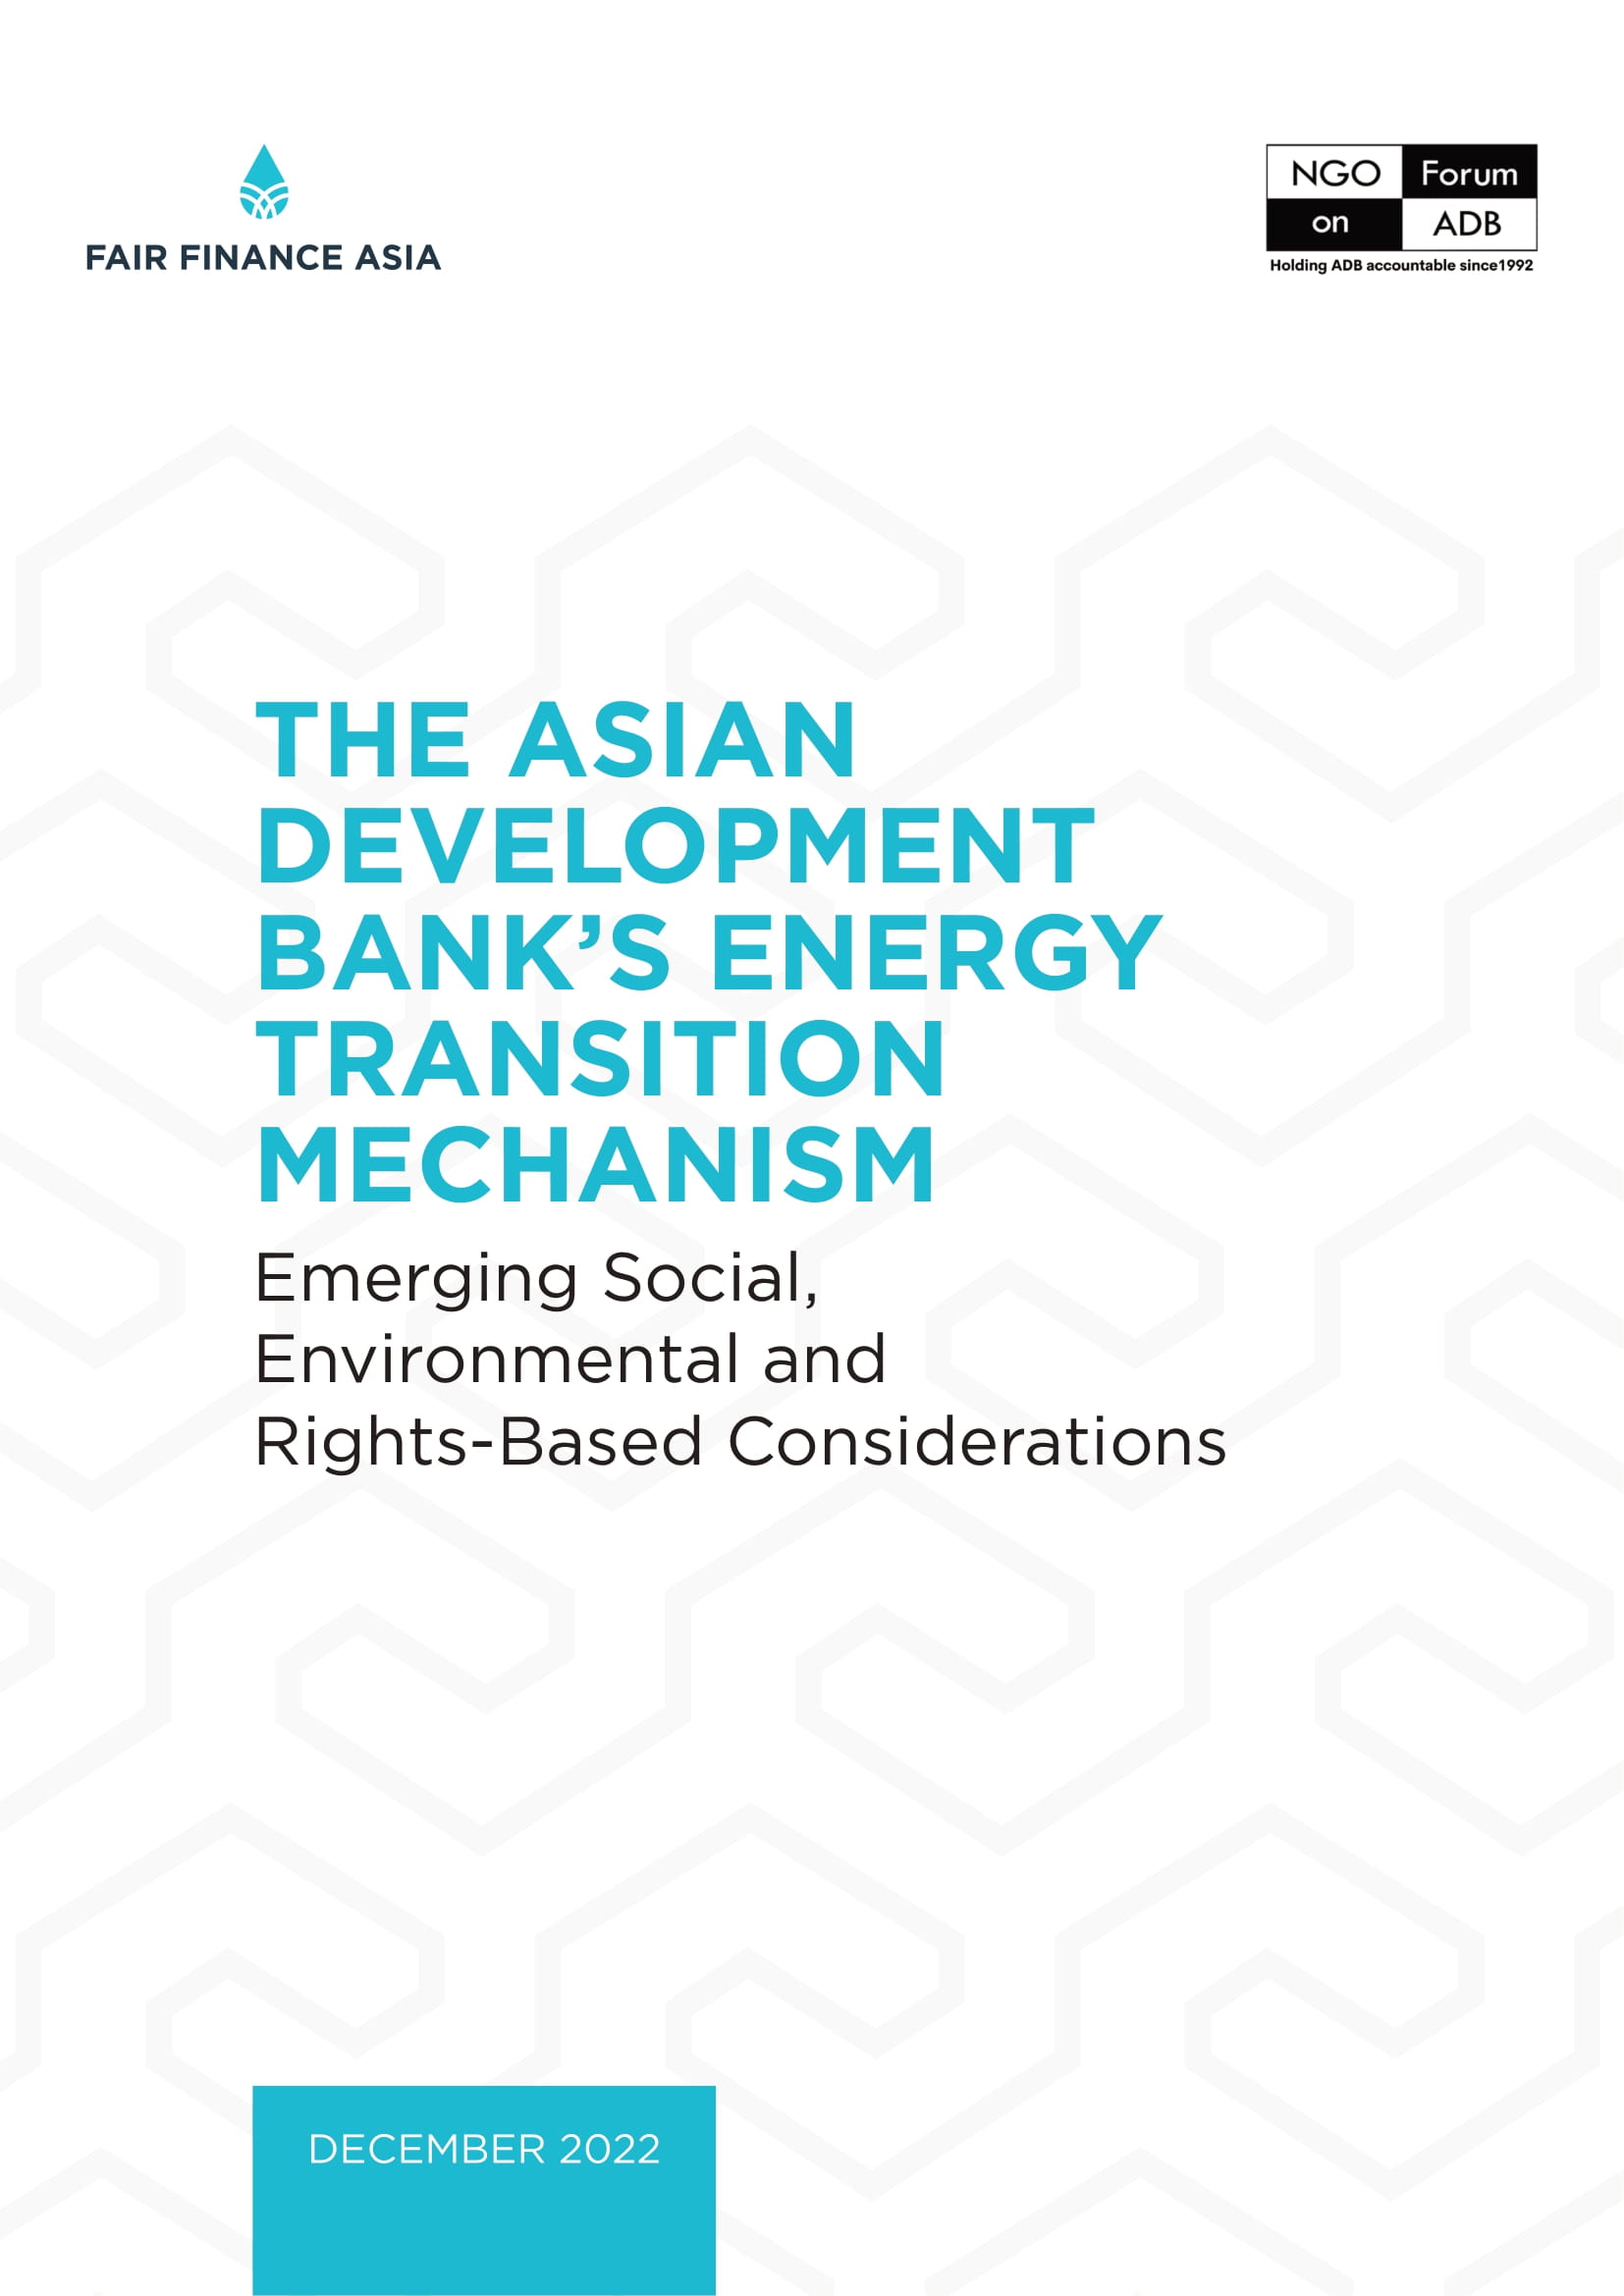 Fair Finance Asia and the NGO Forum on ADB Jointly Launch a Report on the Asian Development Bank’s Energy Transition Mechanism